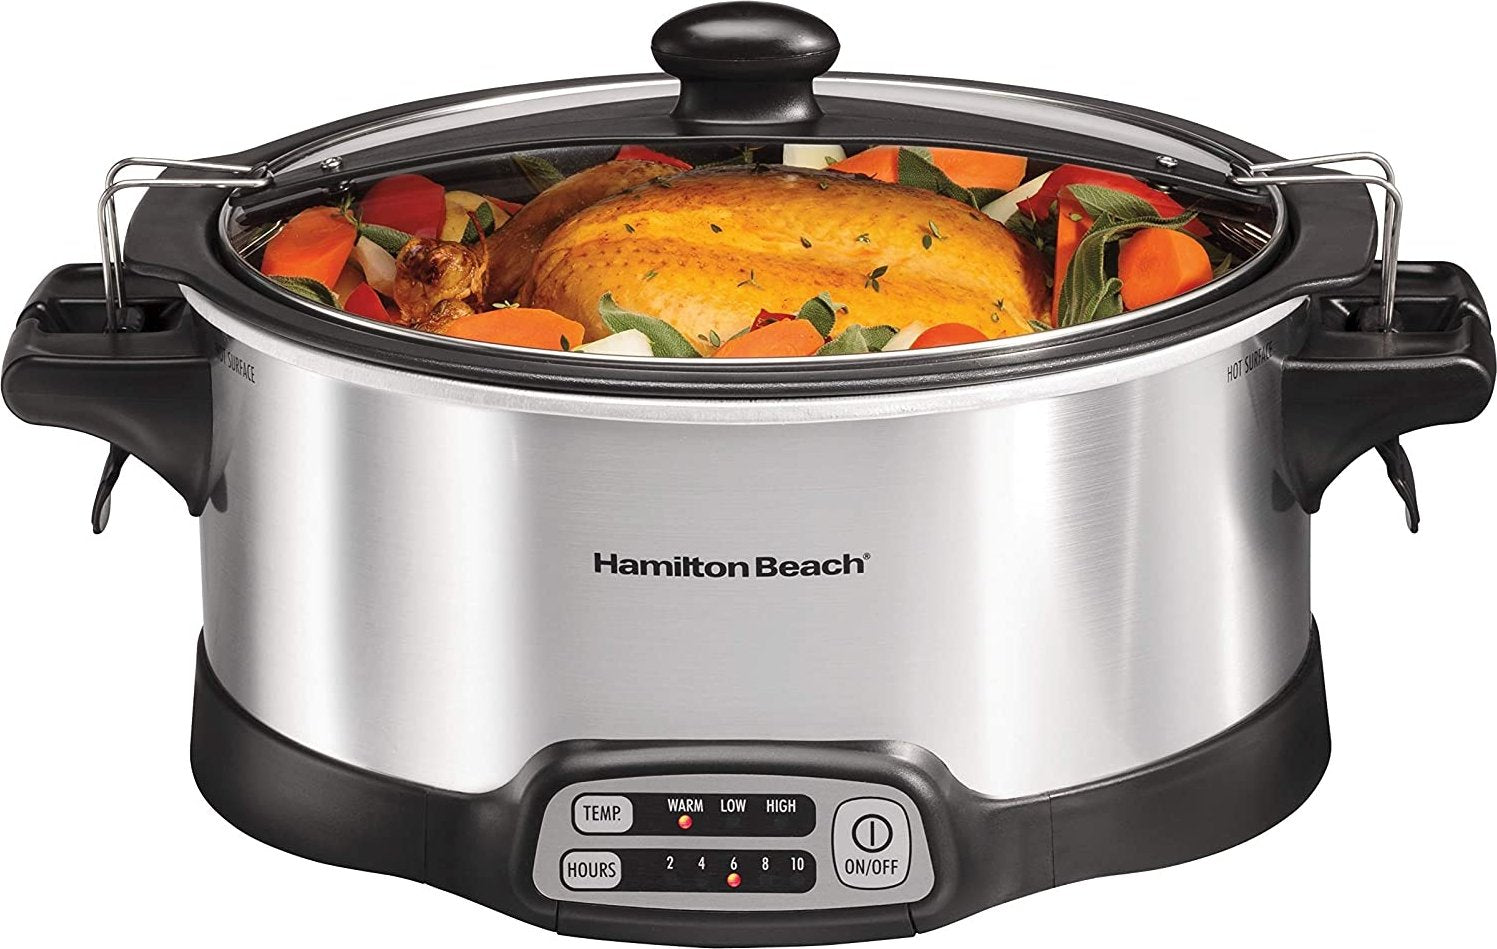 Hamilton Beach - Stay or Go Stovetop Sear & Cook Slow Cooker - 33663